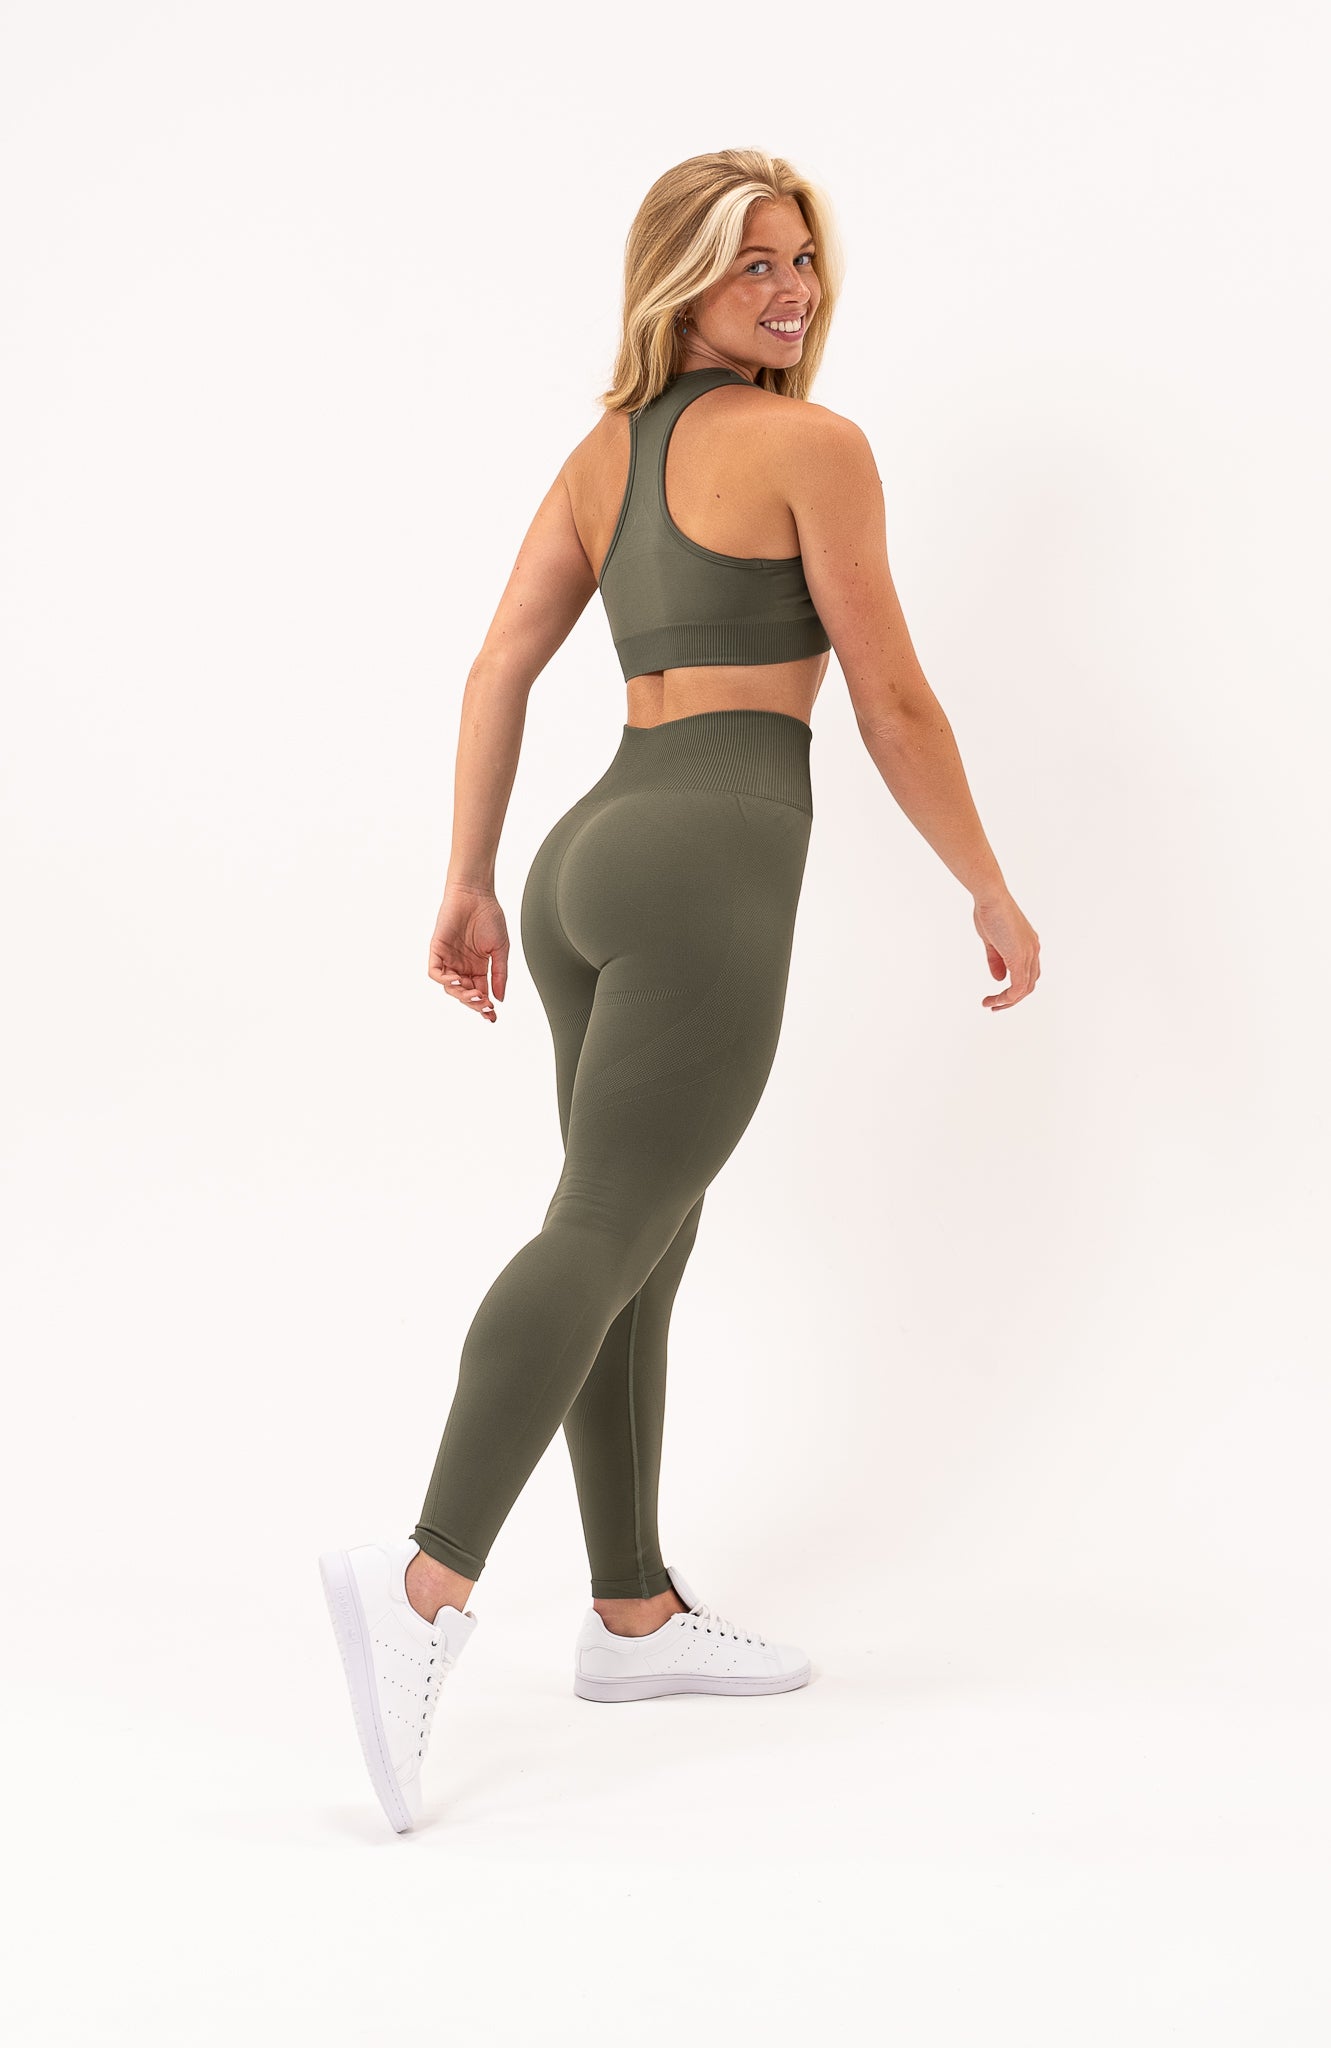 redbaysand Women's seamless Limitless bum shaping, high waisted leggings in Olive green fade – Squat proof sports tights for Gym workouts training, Running, yoga, bodybuilding and bikini fitness.